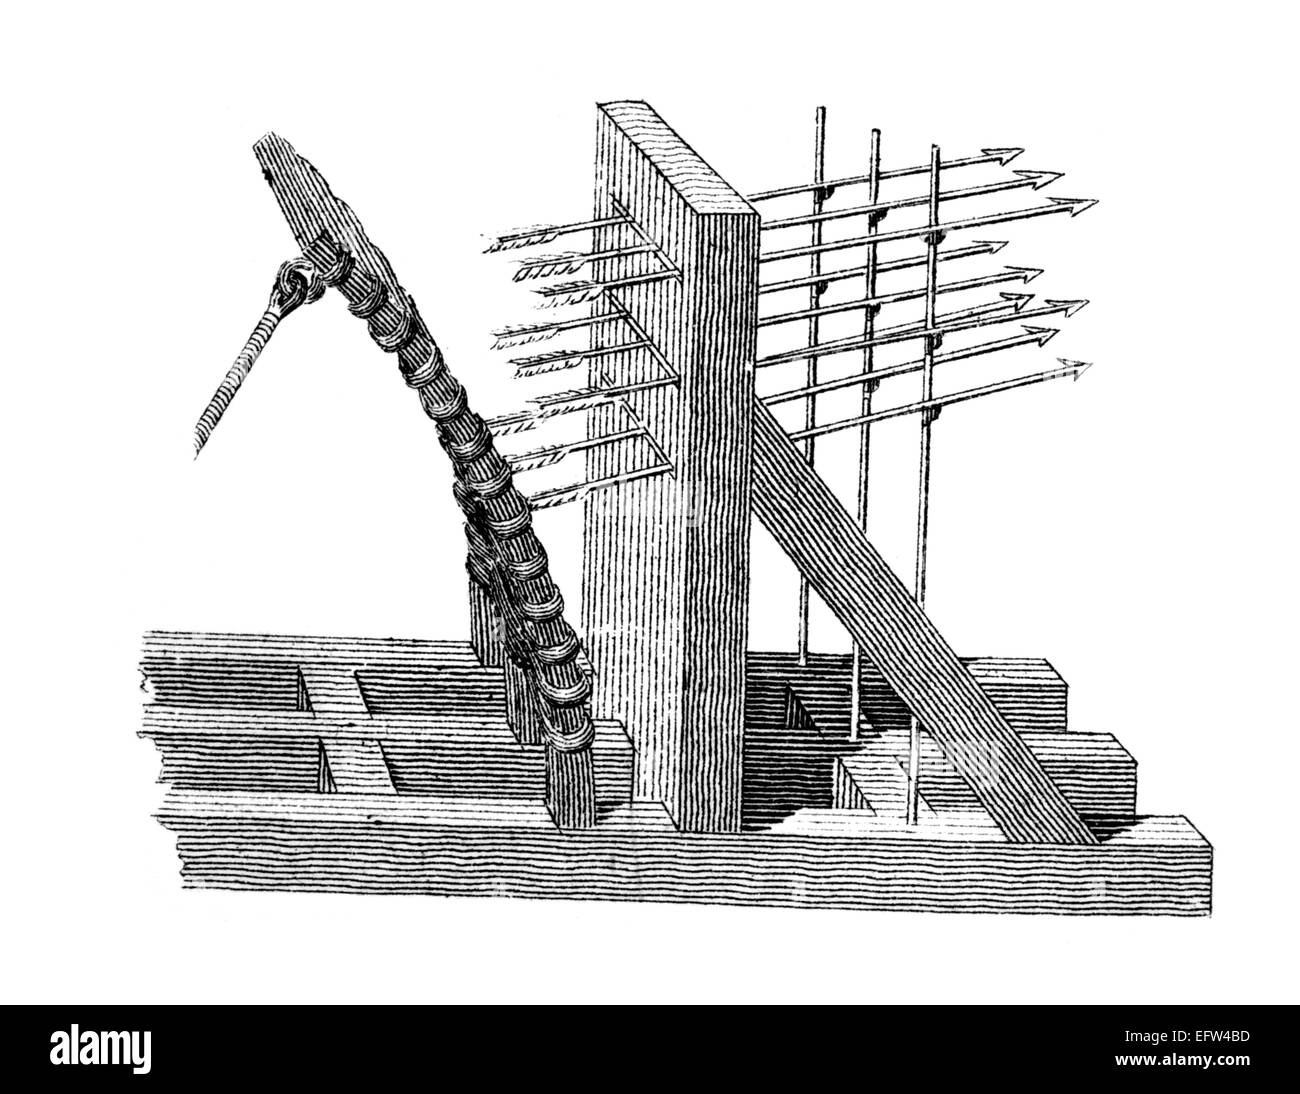 Victorian engraving of a medieval ballista. Digitally restored image from a mid-19th century Encyclopaedia. Stock Photo